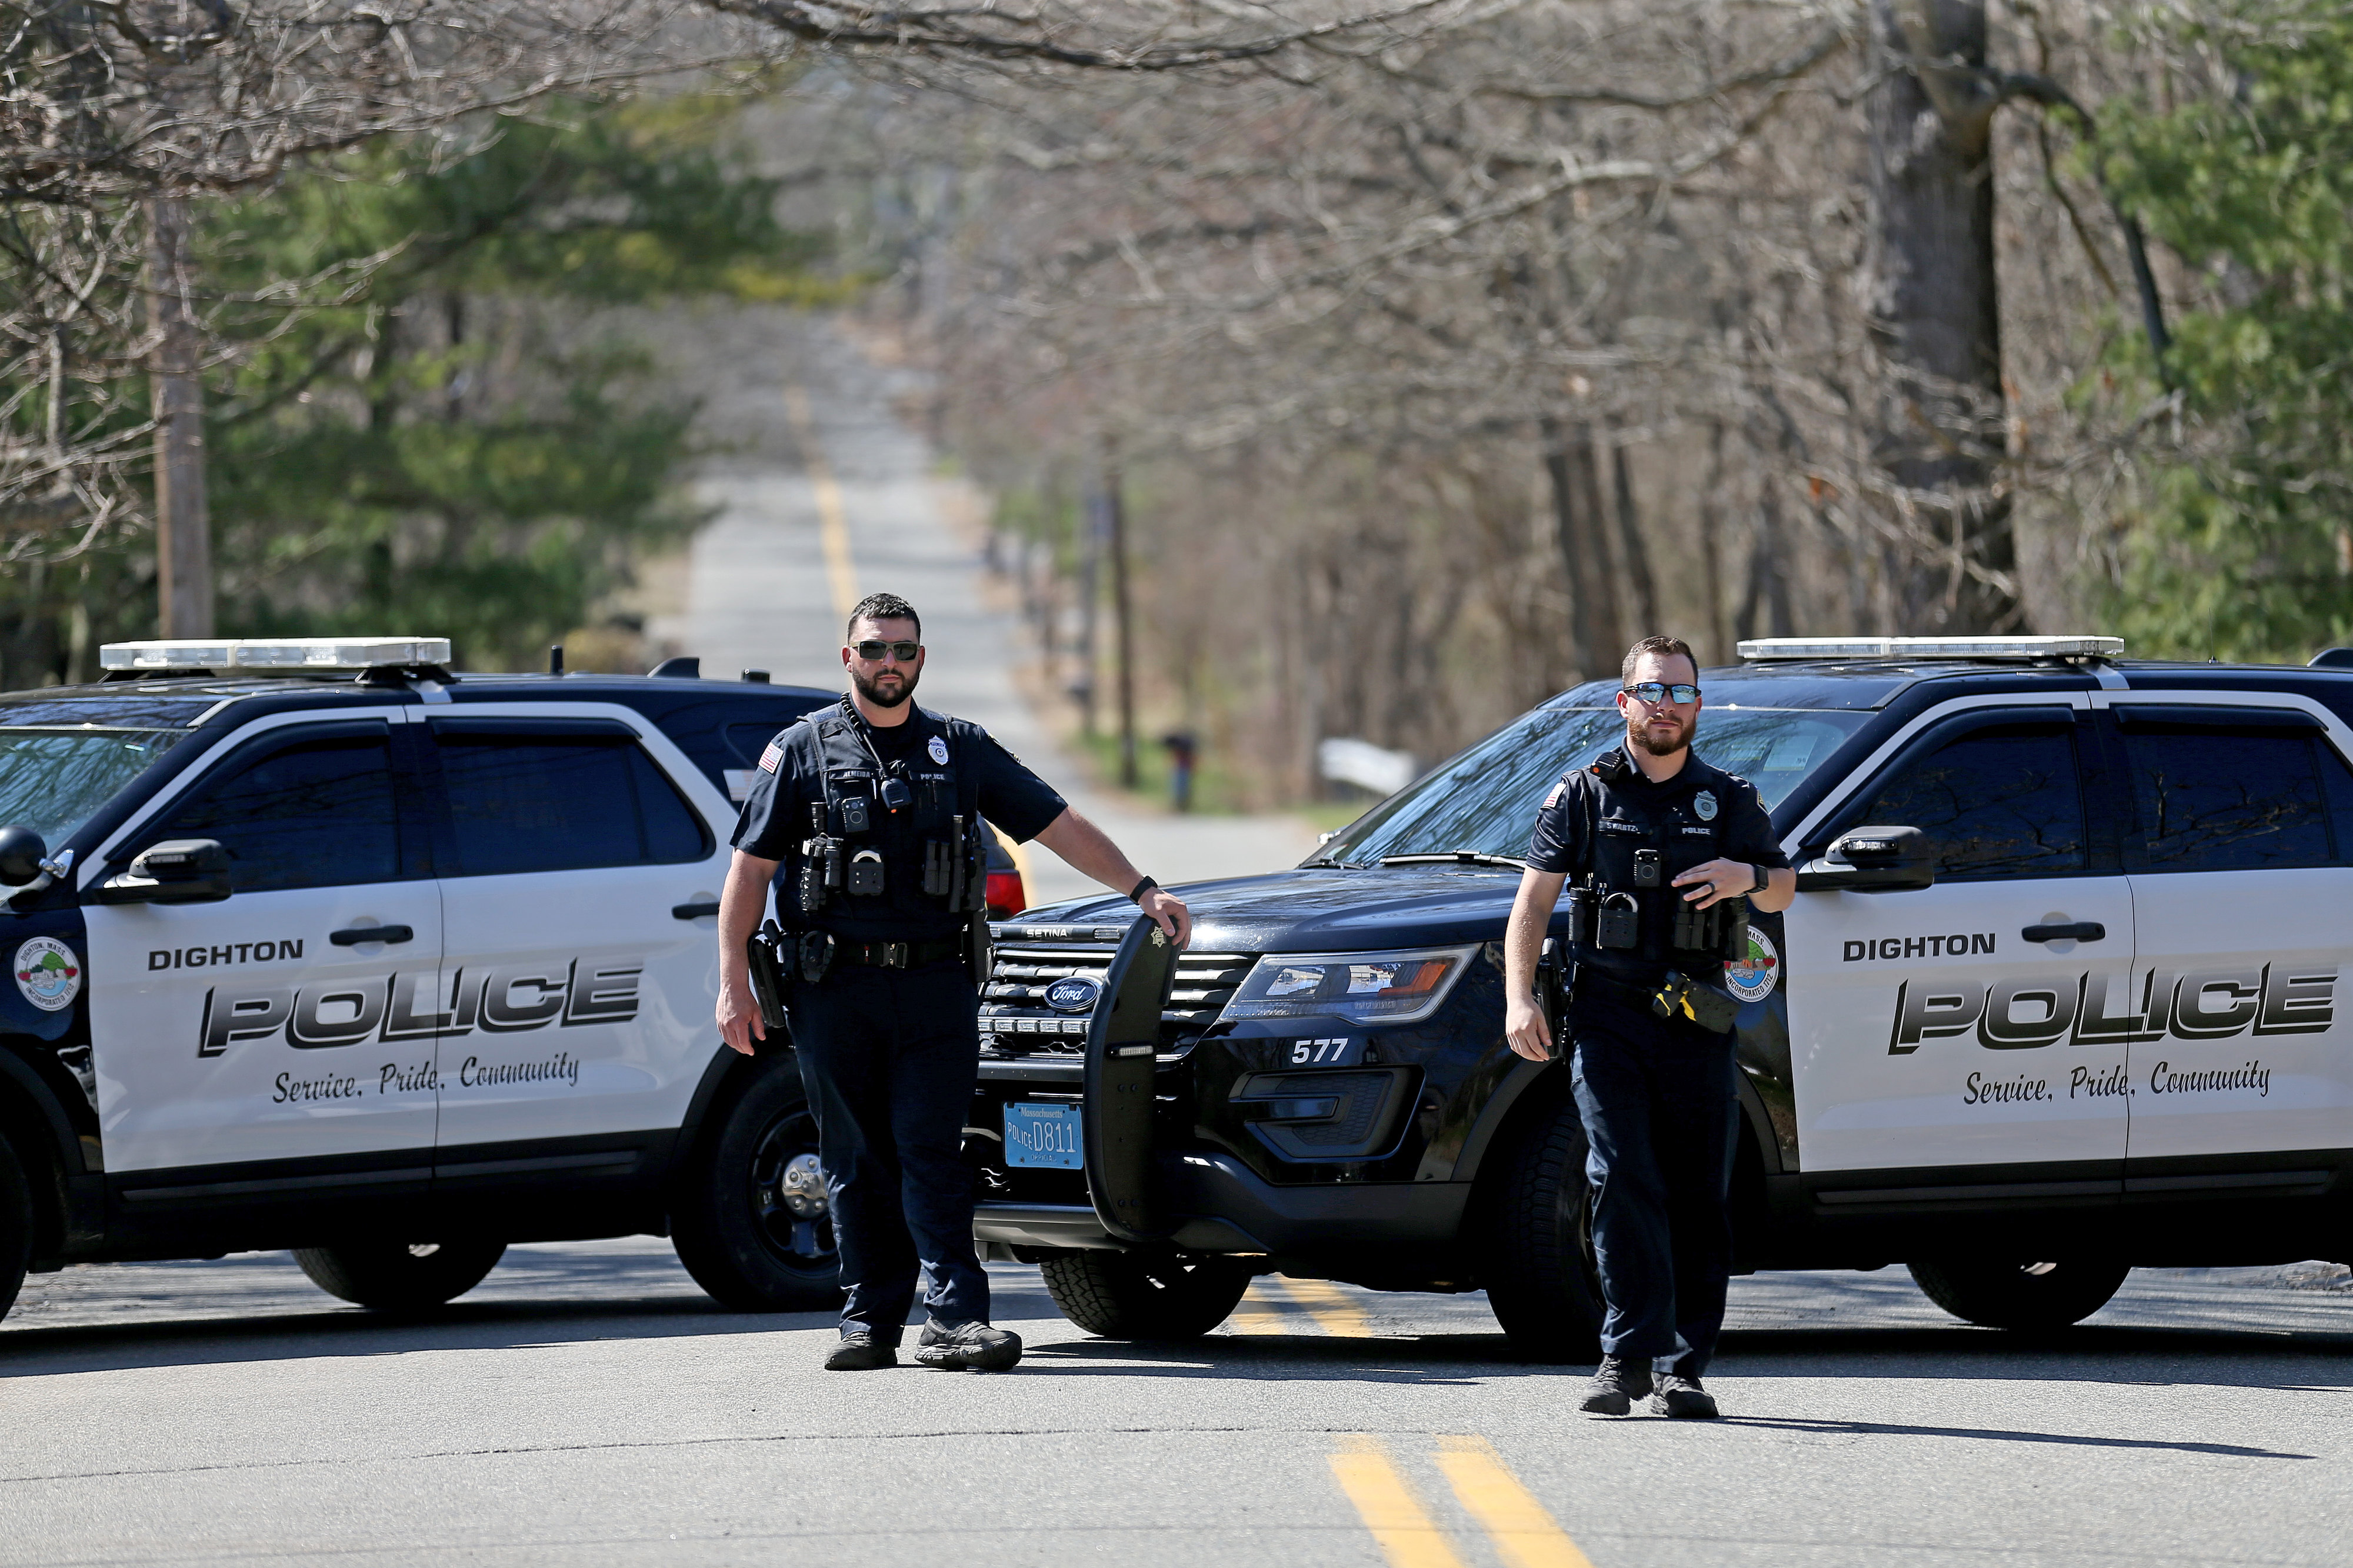 Police block Williams Street in Dighton, Massachusetts, as the FBI investigates the home of a 21-year-old member of the Massachusetts Air National Guard in connection with the disclosure of highly classified military documents on the Ukraine war on Thursday, April 13, 2023.